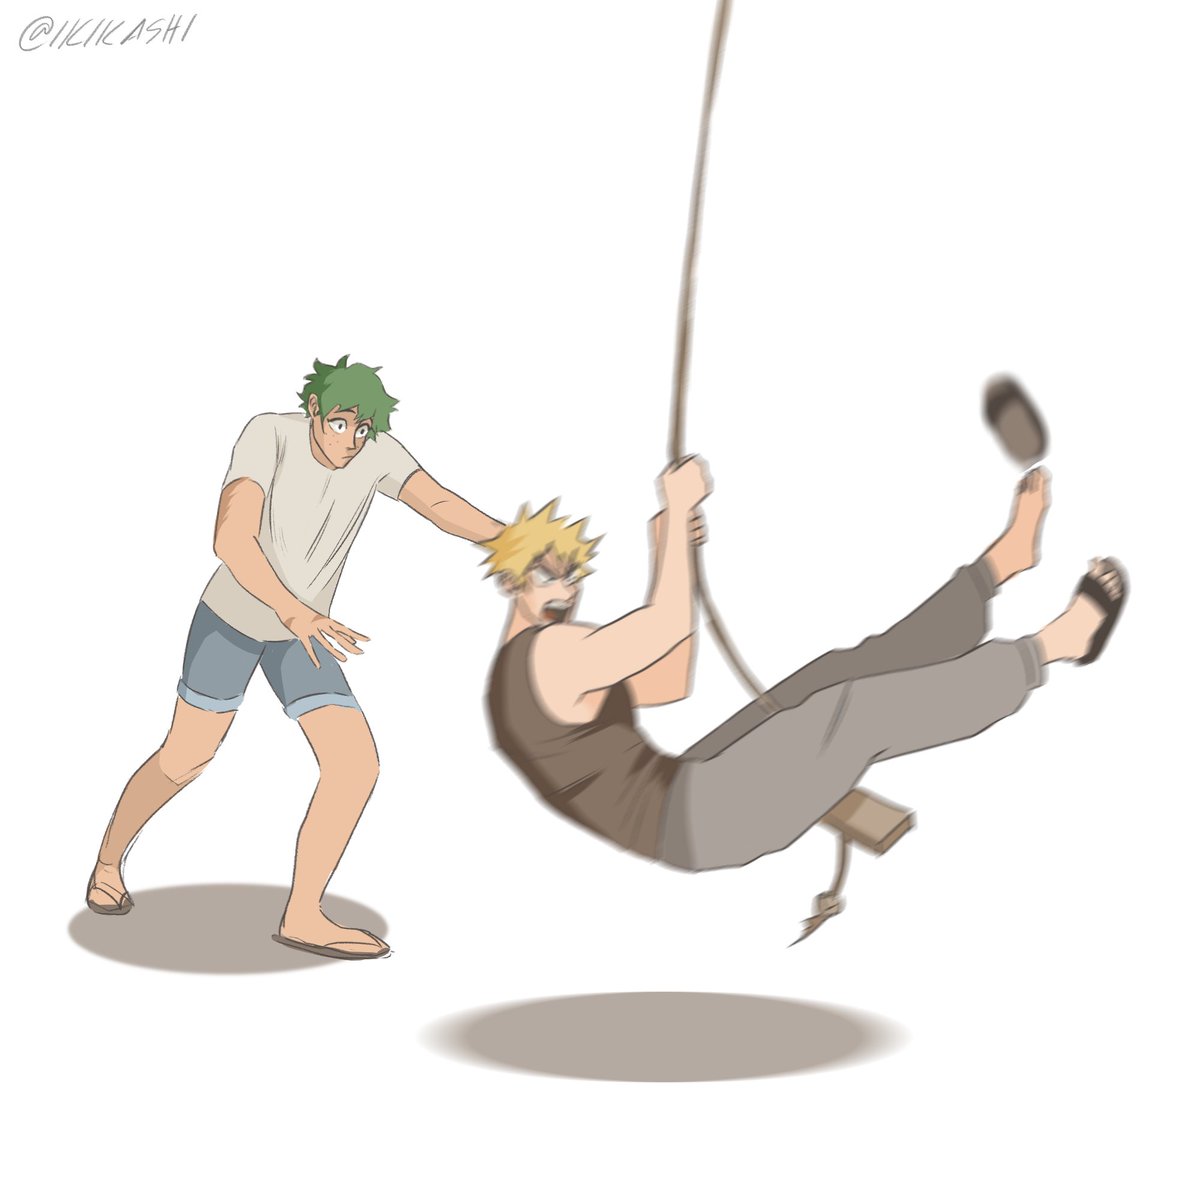 they tried being romantic at the park one time #bkdk #bakudeku